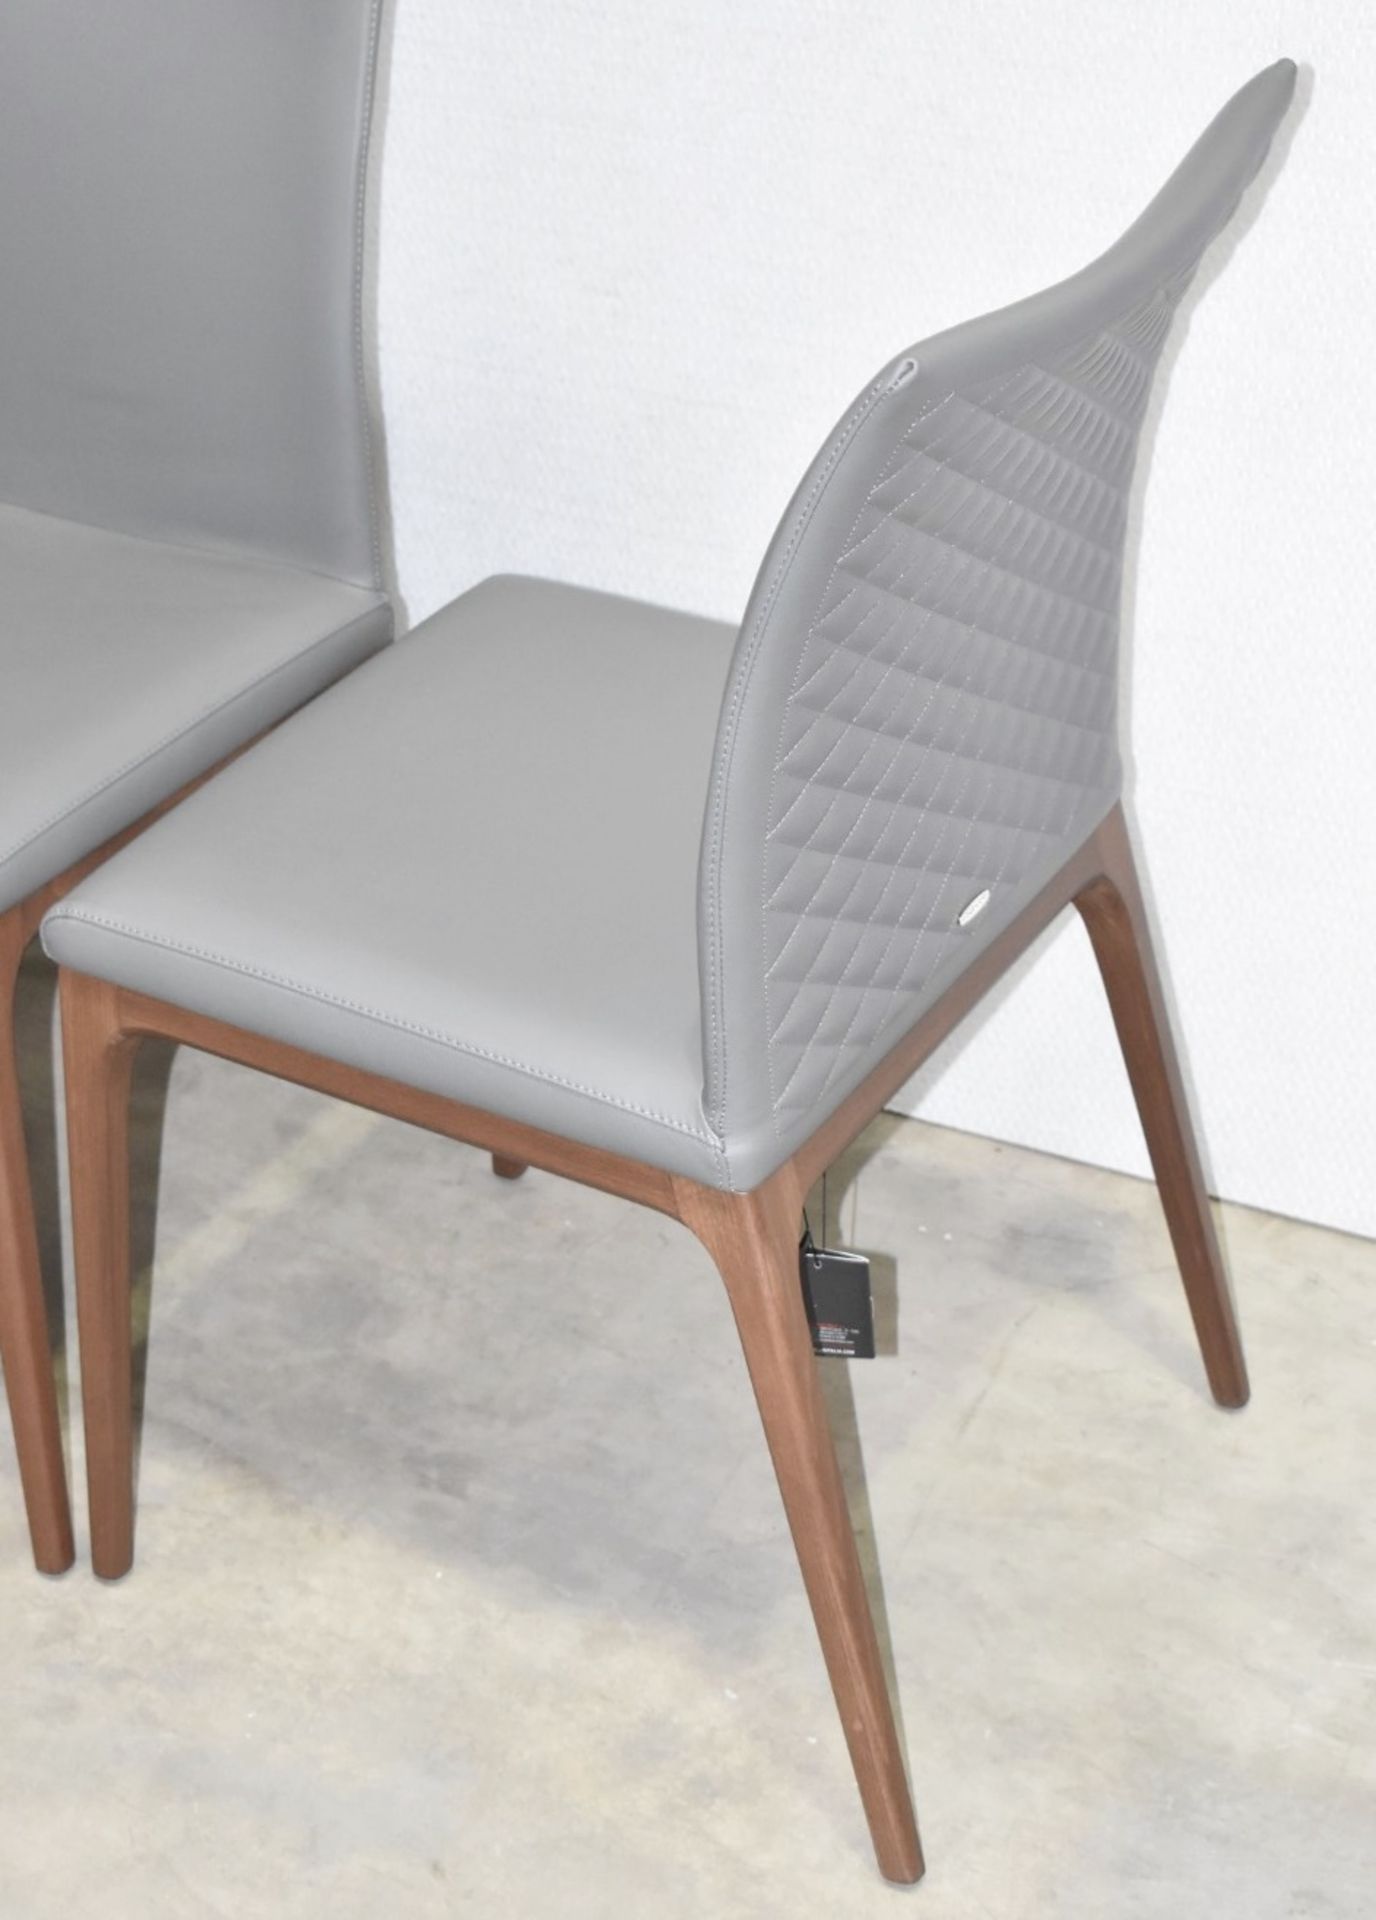 4 x CATTELAN ITALIA 'Arcadia Couture' Leather Upholstered Dining Chairs - Total Original RRP £3,540 - Image 5 of 19